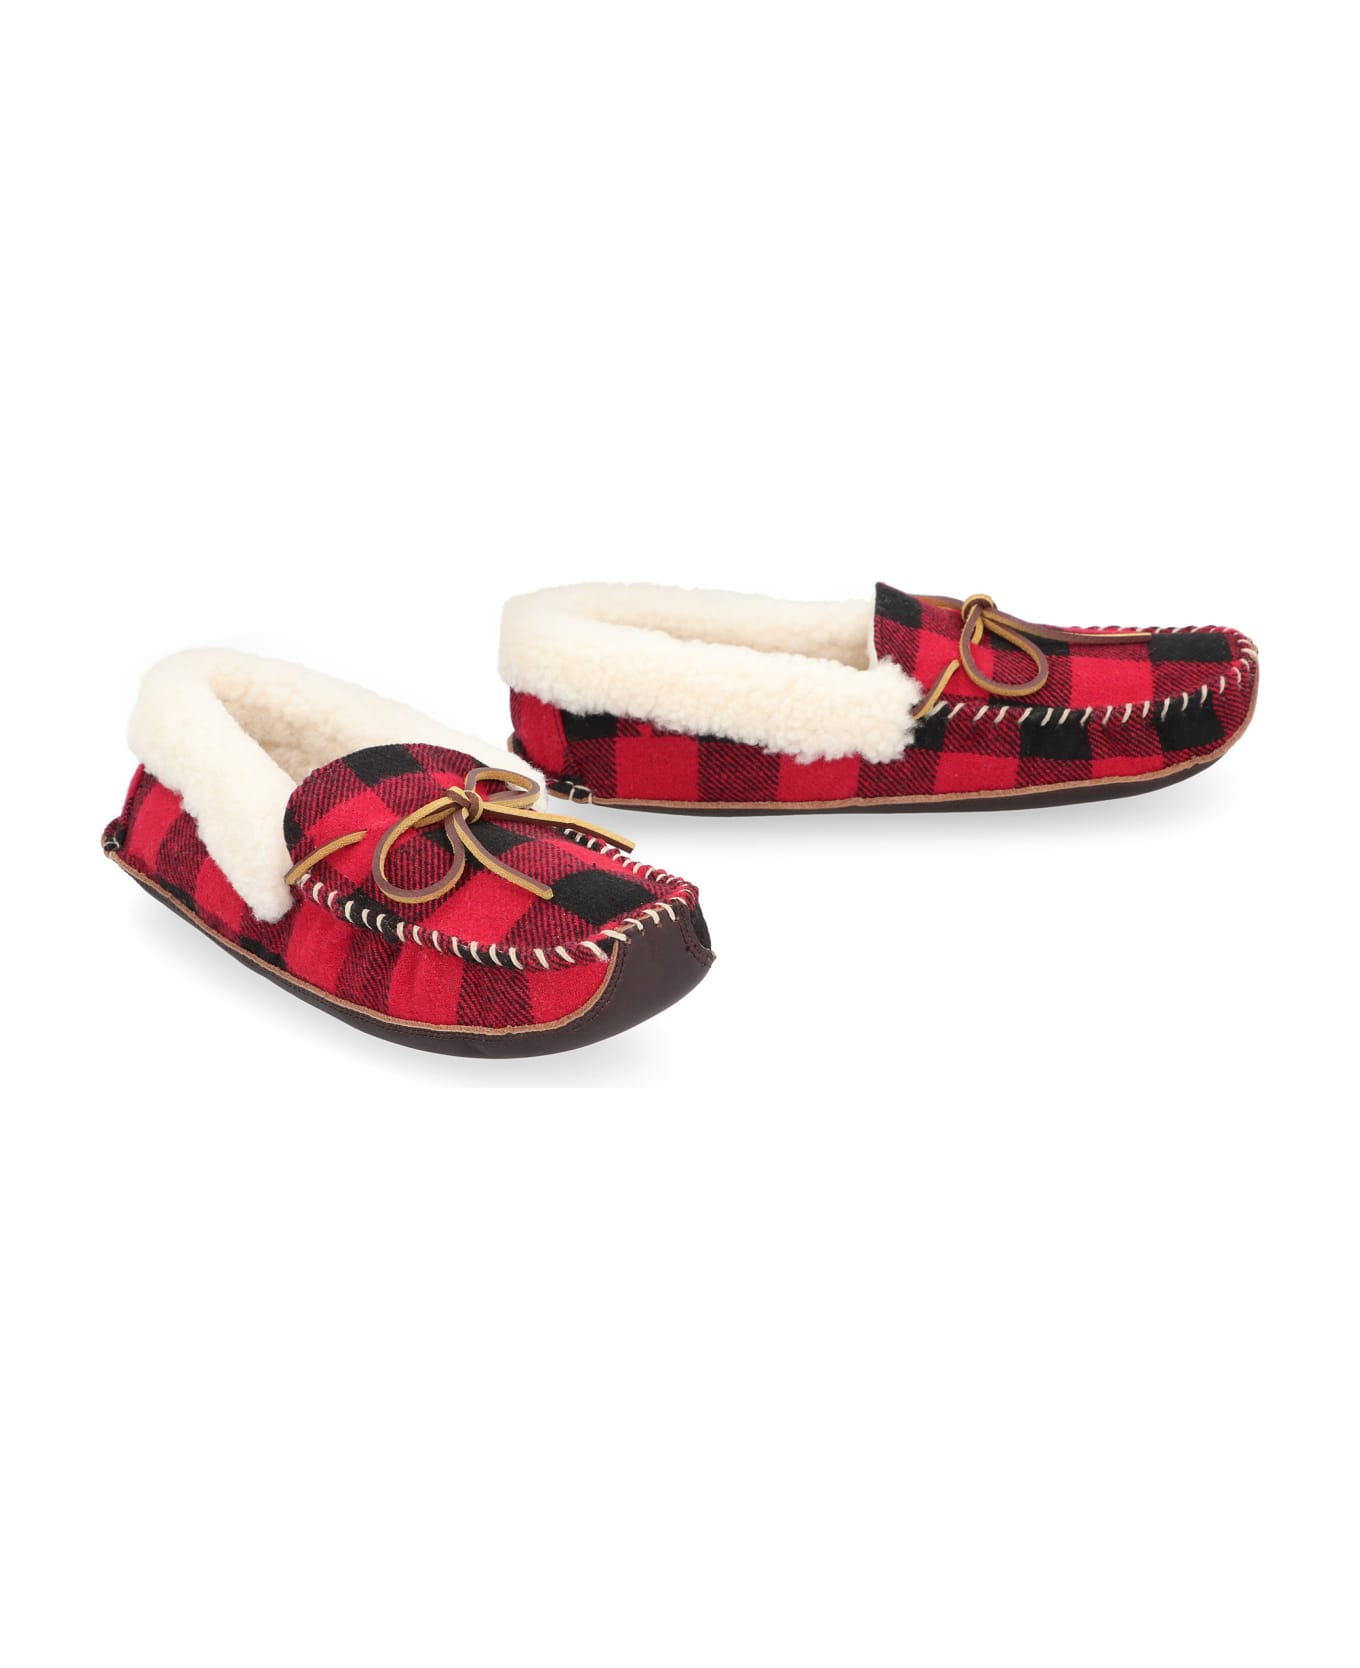 Polo Ralph Lauren Slippers - red